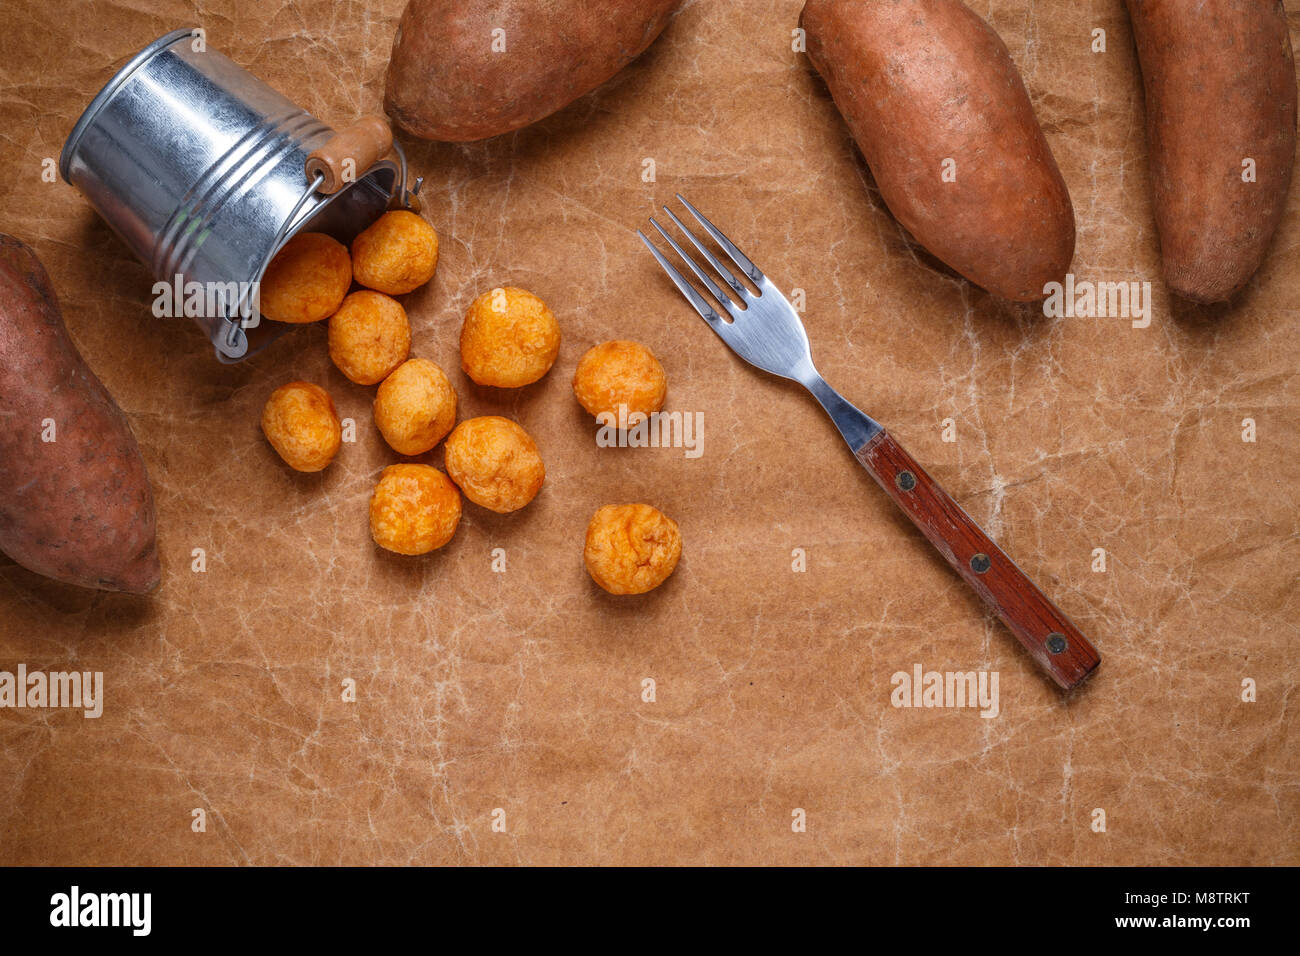 Mashed sweet potato and cheese balls on brown paper background Stock Photo